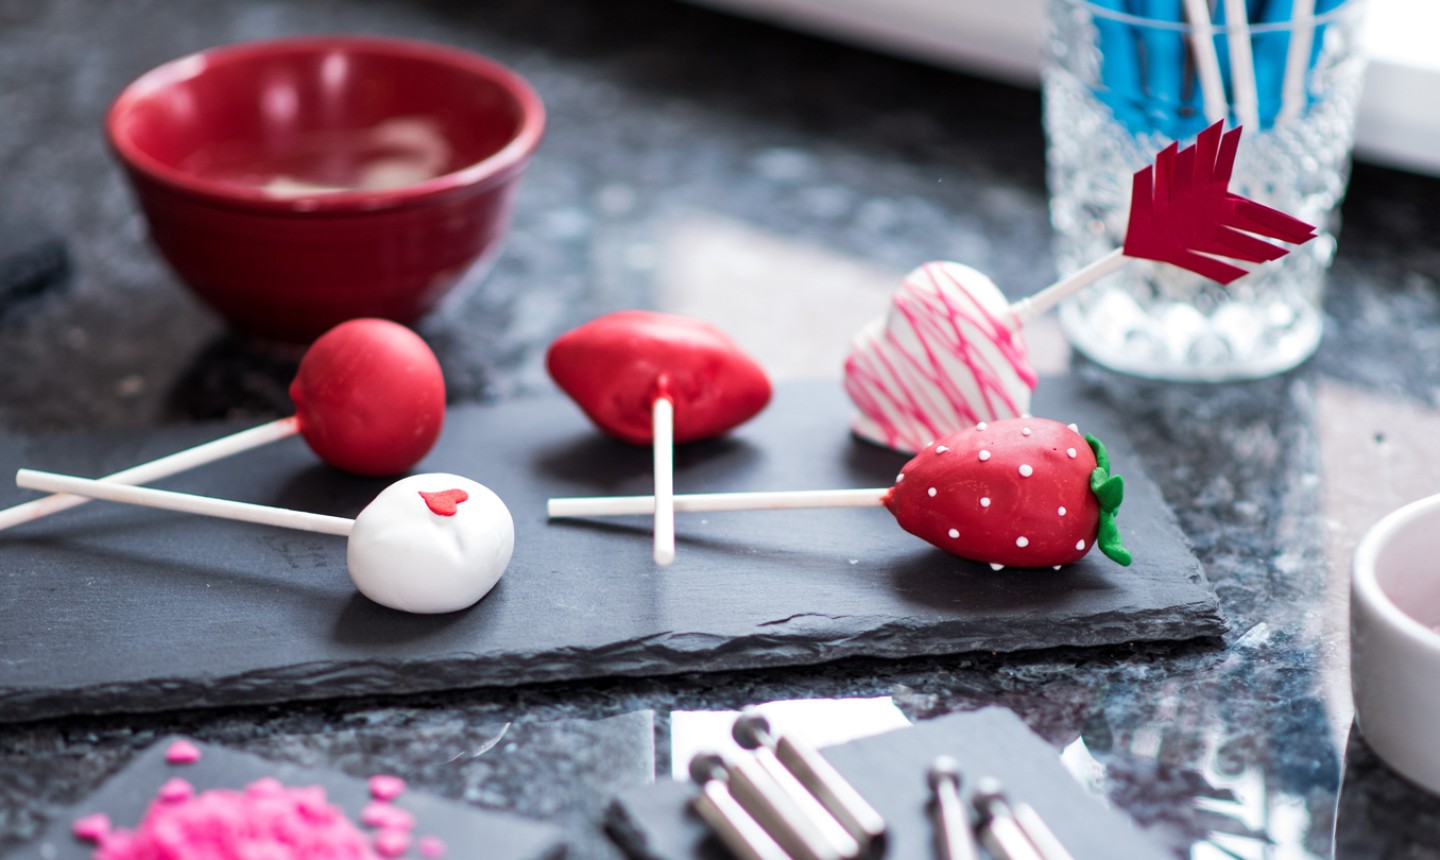 intelligentie Overweldigend melk wit The Do's and Don'ts of Making Cake Pops | Craftsy